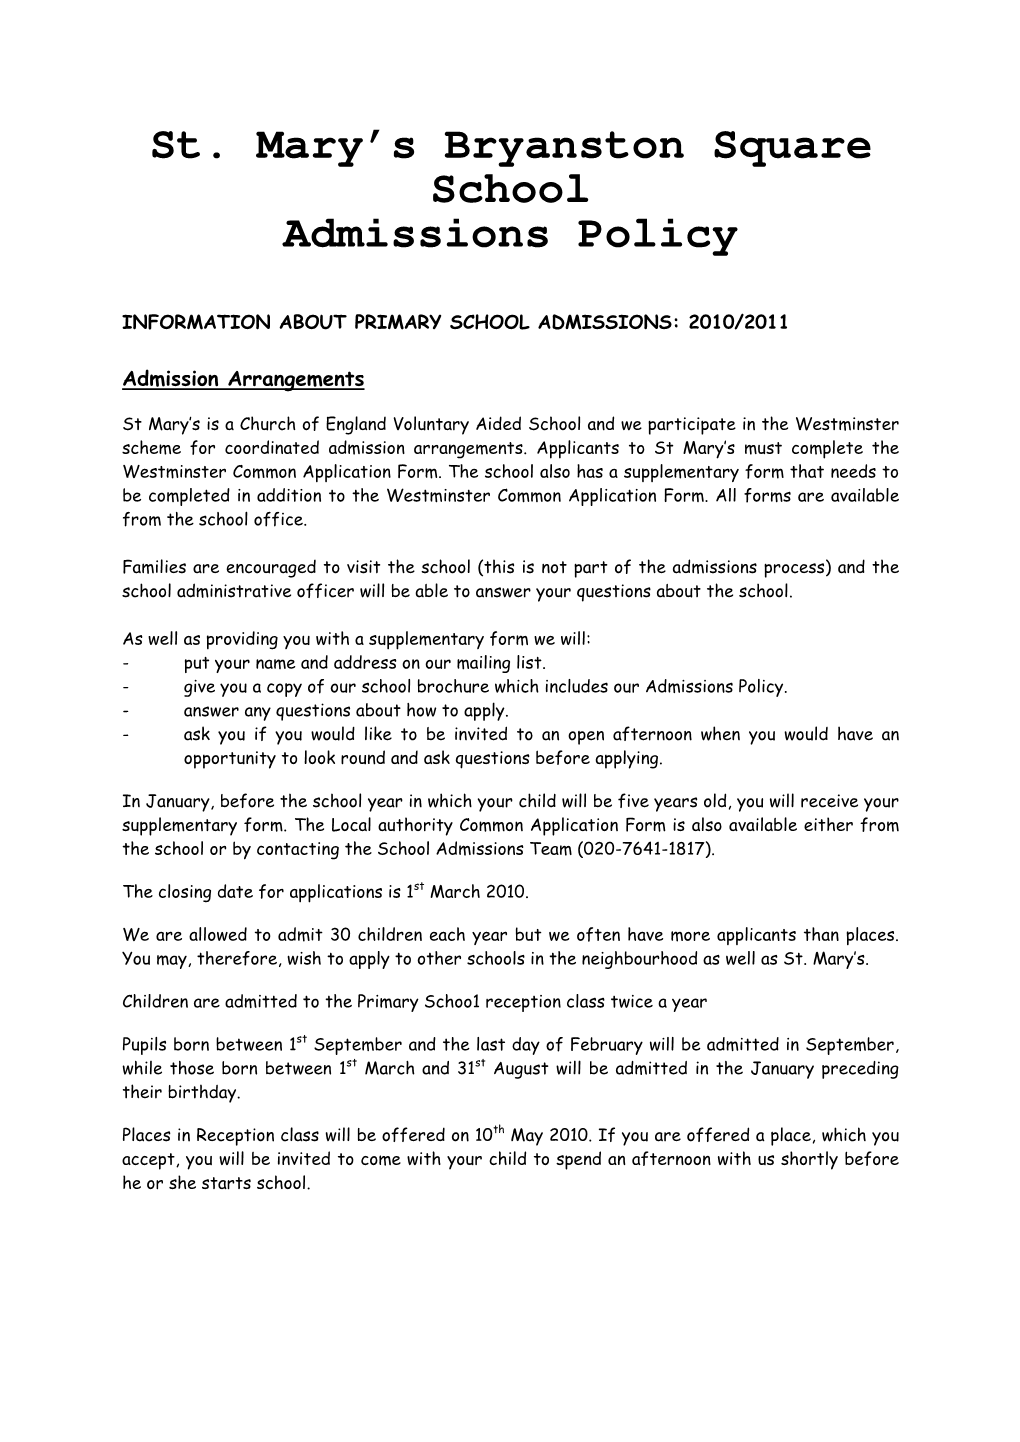 St. Mary's Bryanston Square School Admissions Policy